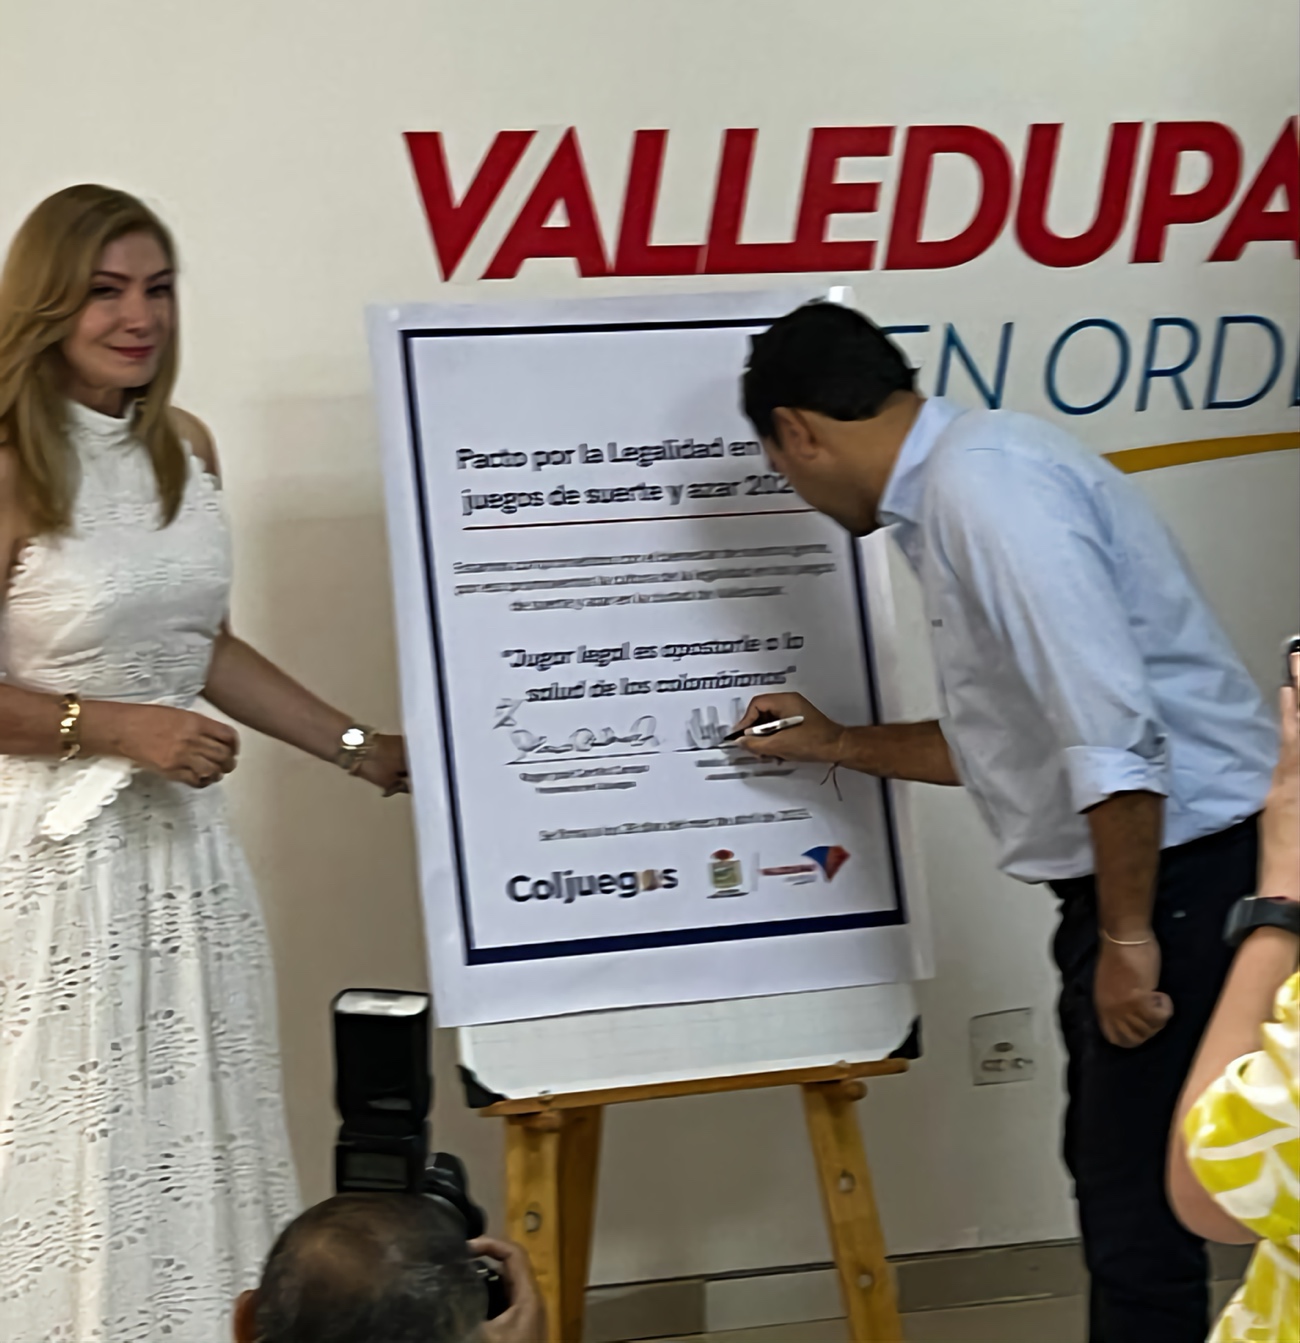 Coljuegos signs an agreement for legality in Valledupar